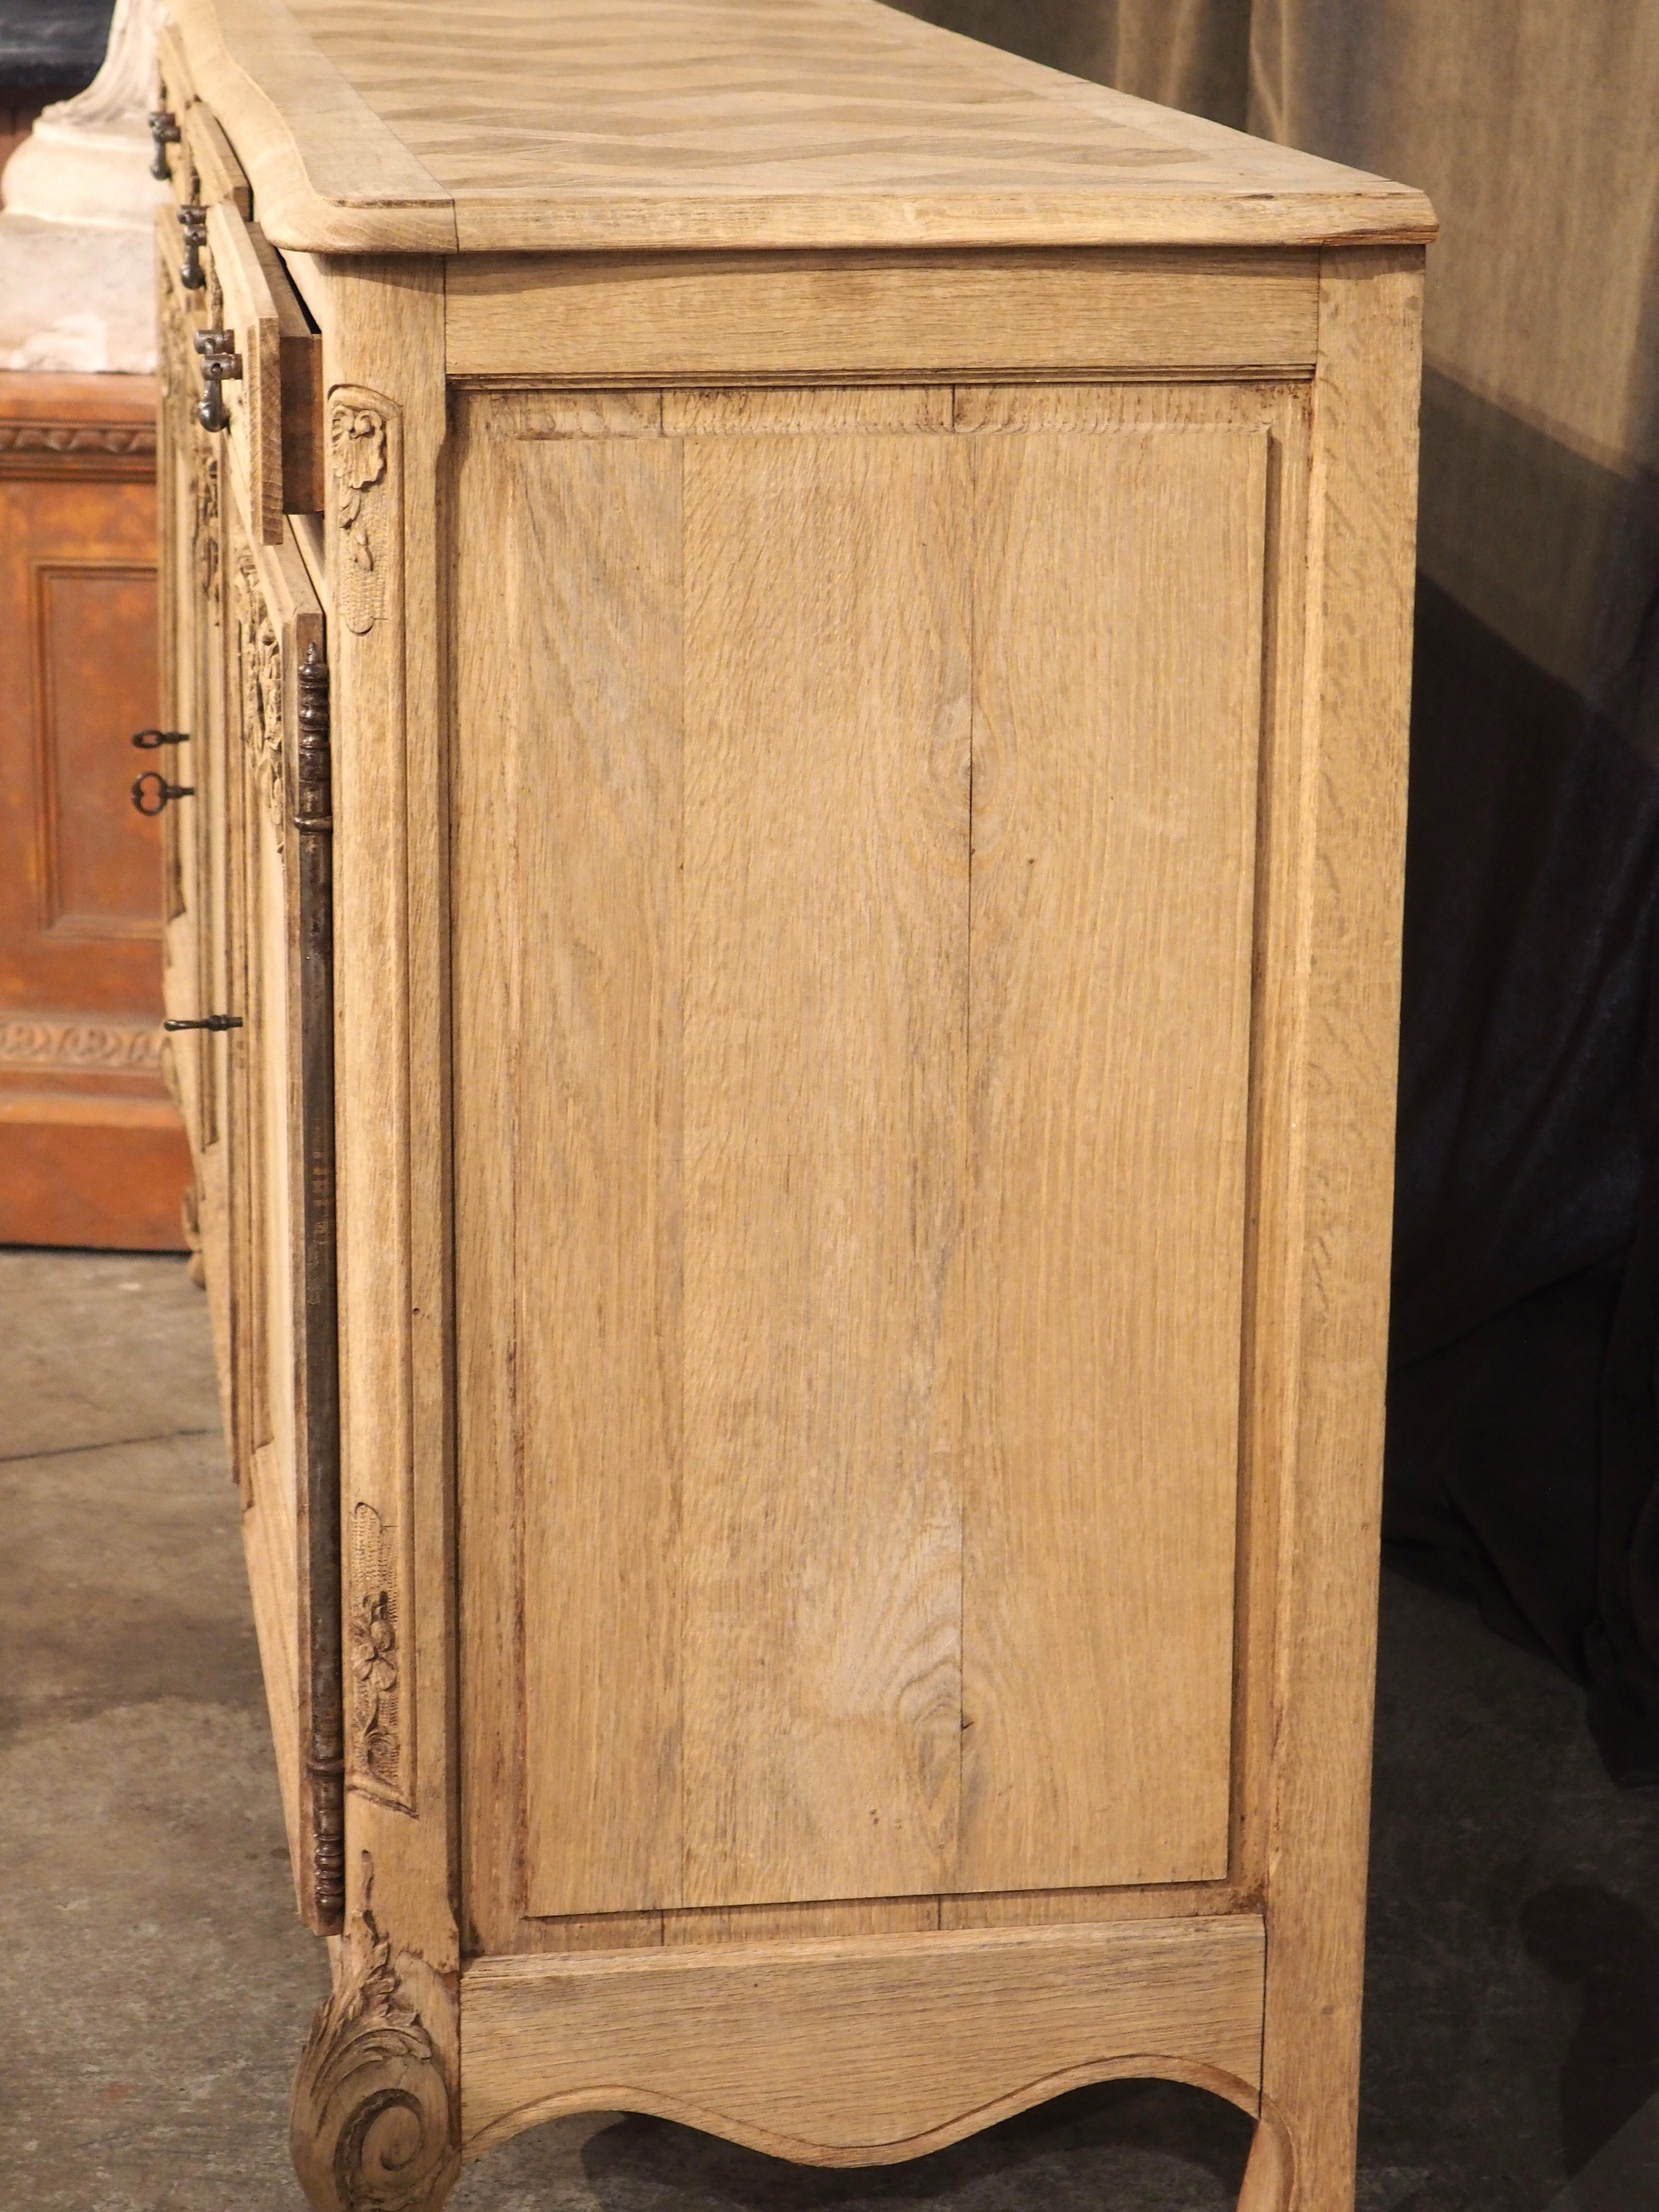 With an abundance of available storage compartments, this three-door French enfilade would make a fantastic addition to a dining room, living room, or bar area. Hand-carved in oak in the early 1900s, several Louis XV-style carvings embellish the